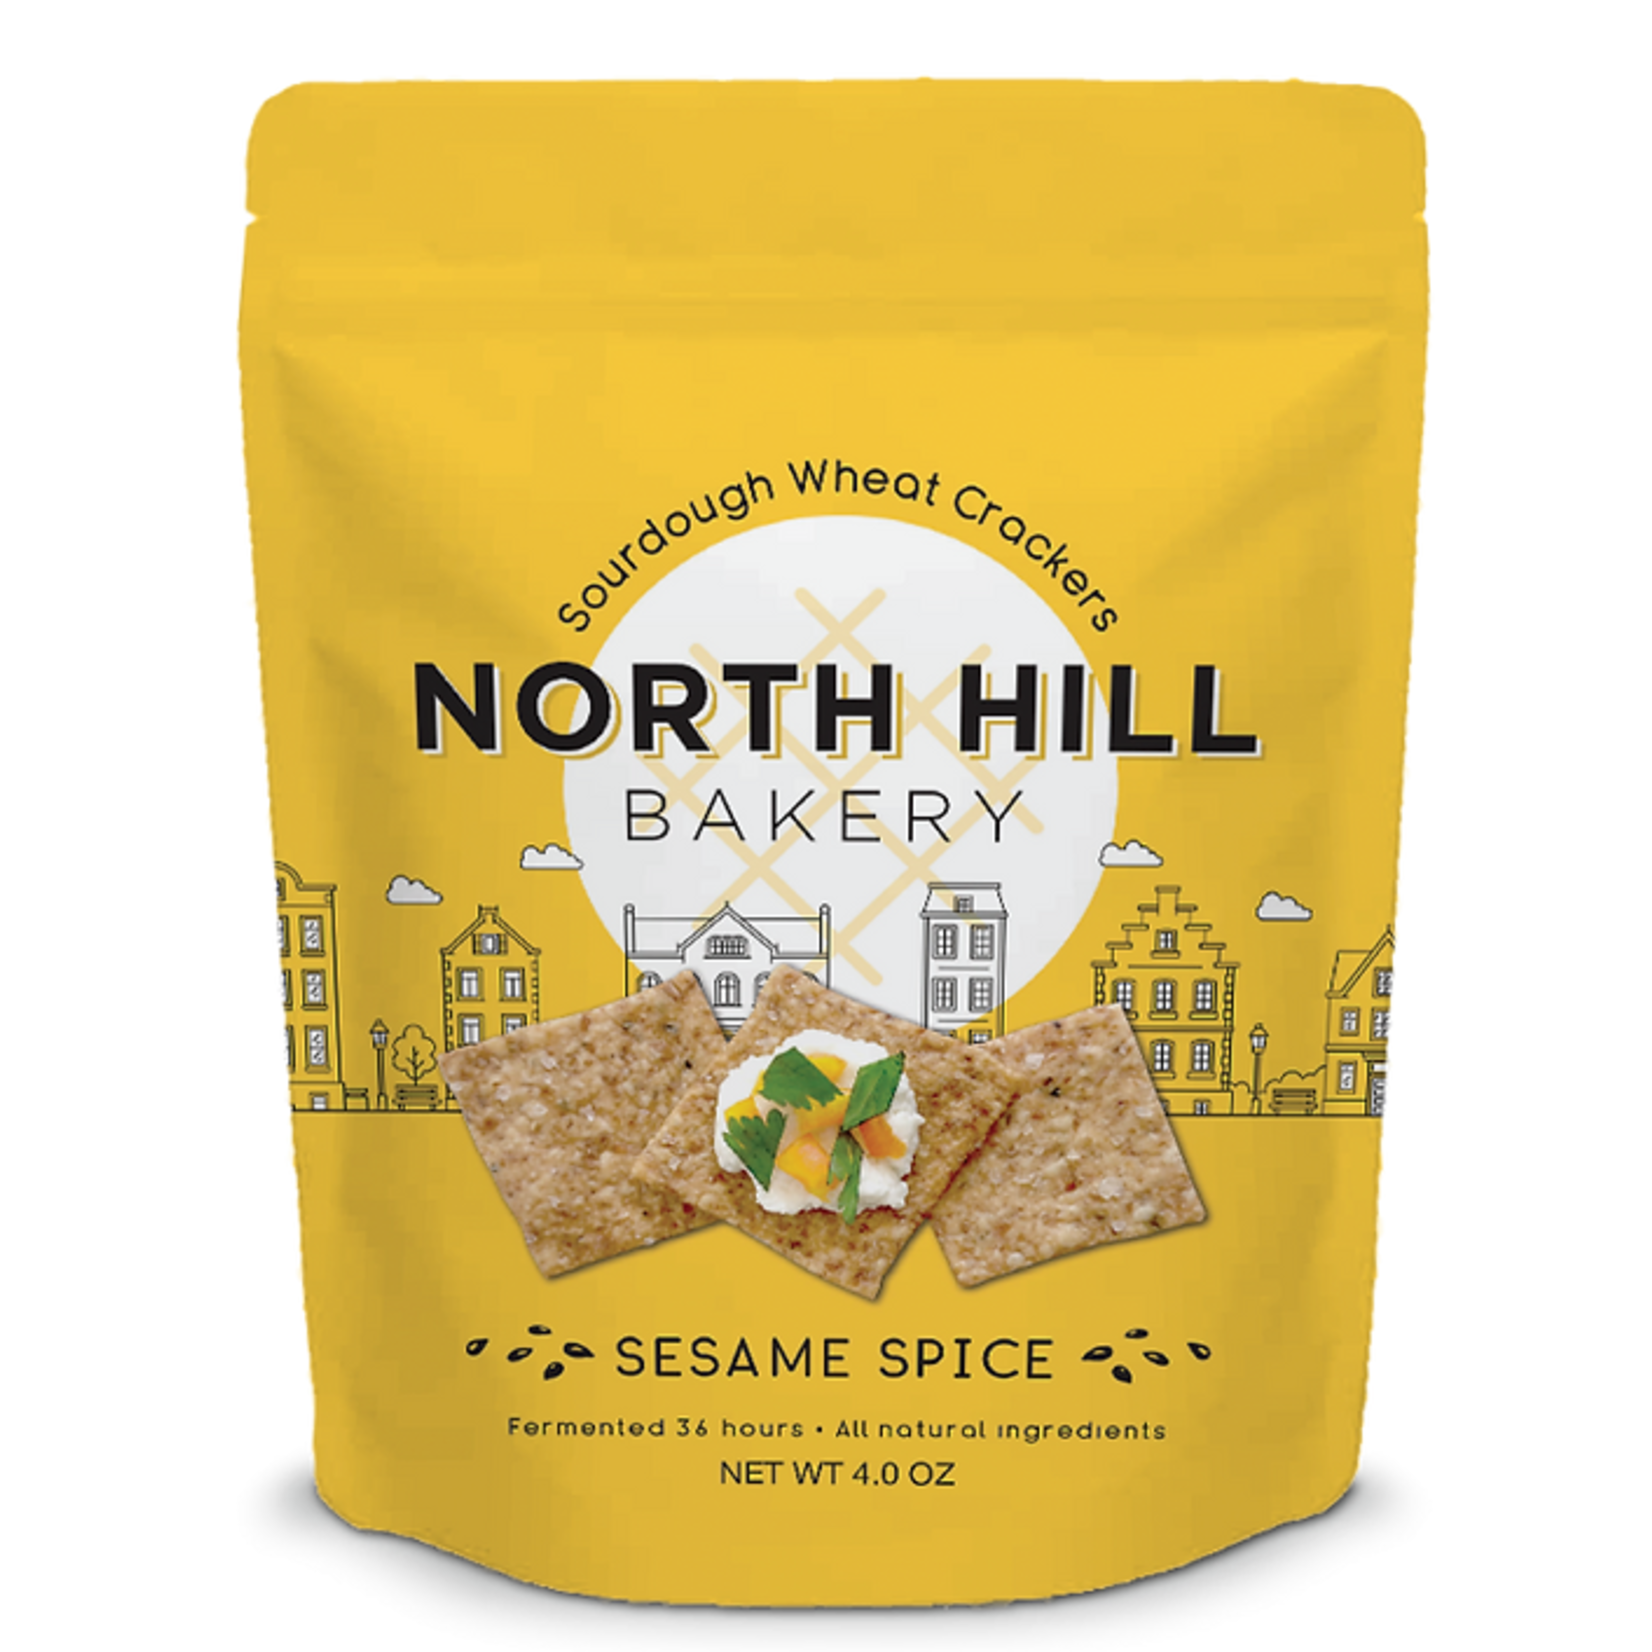 North Hill Bakery Sourdough Wheat Crackers Sesame Spice 4 ounce